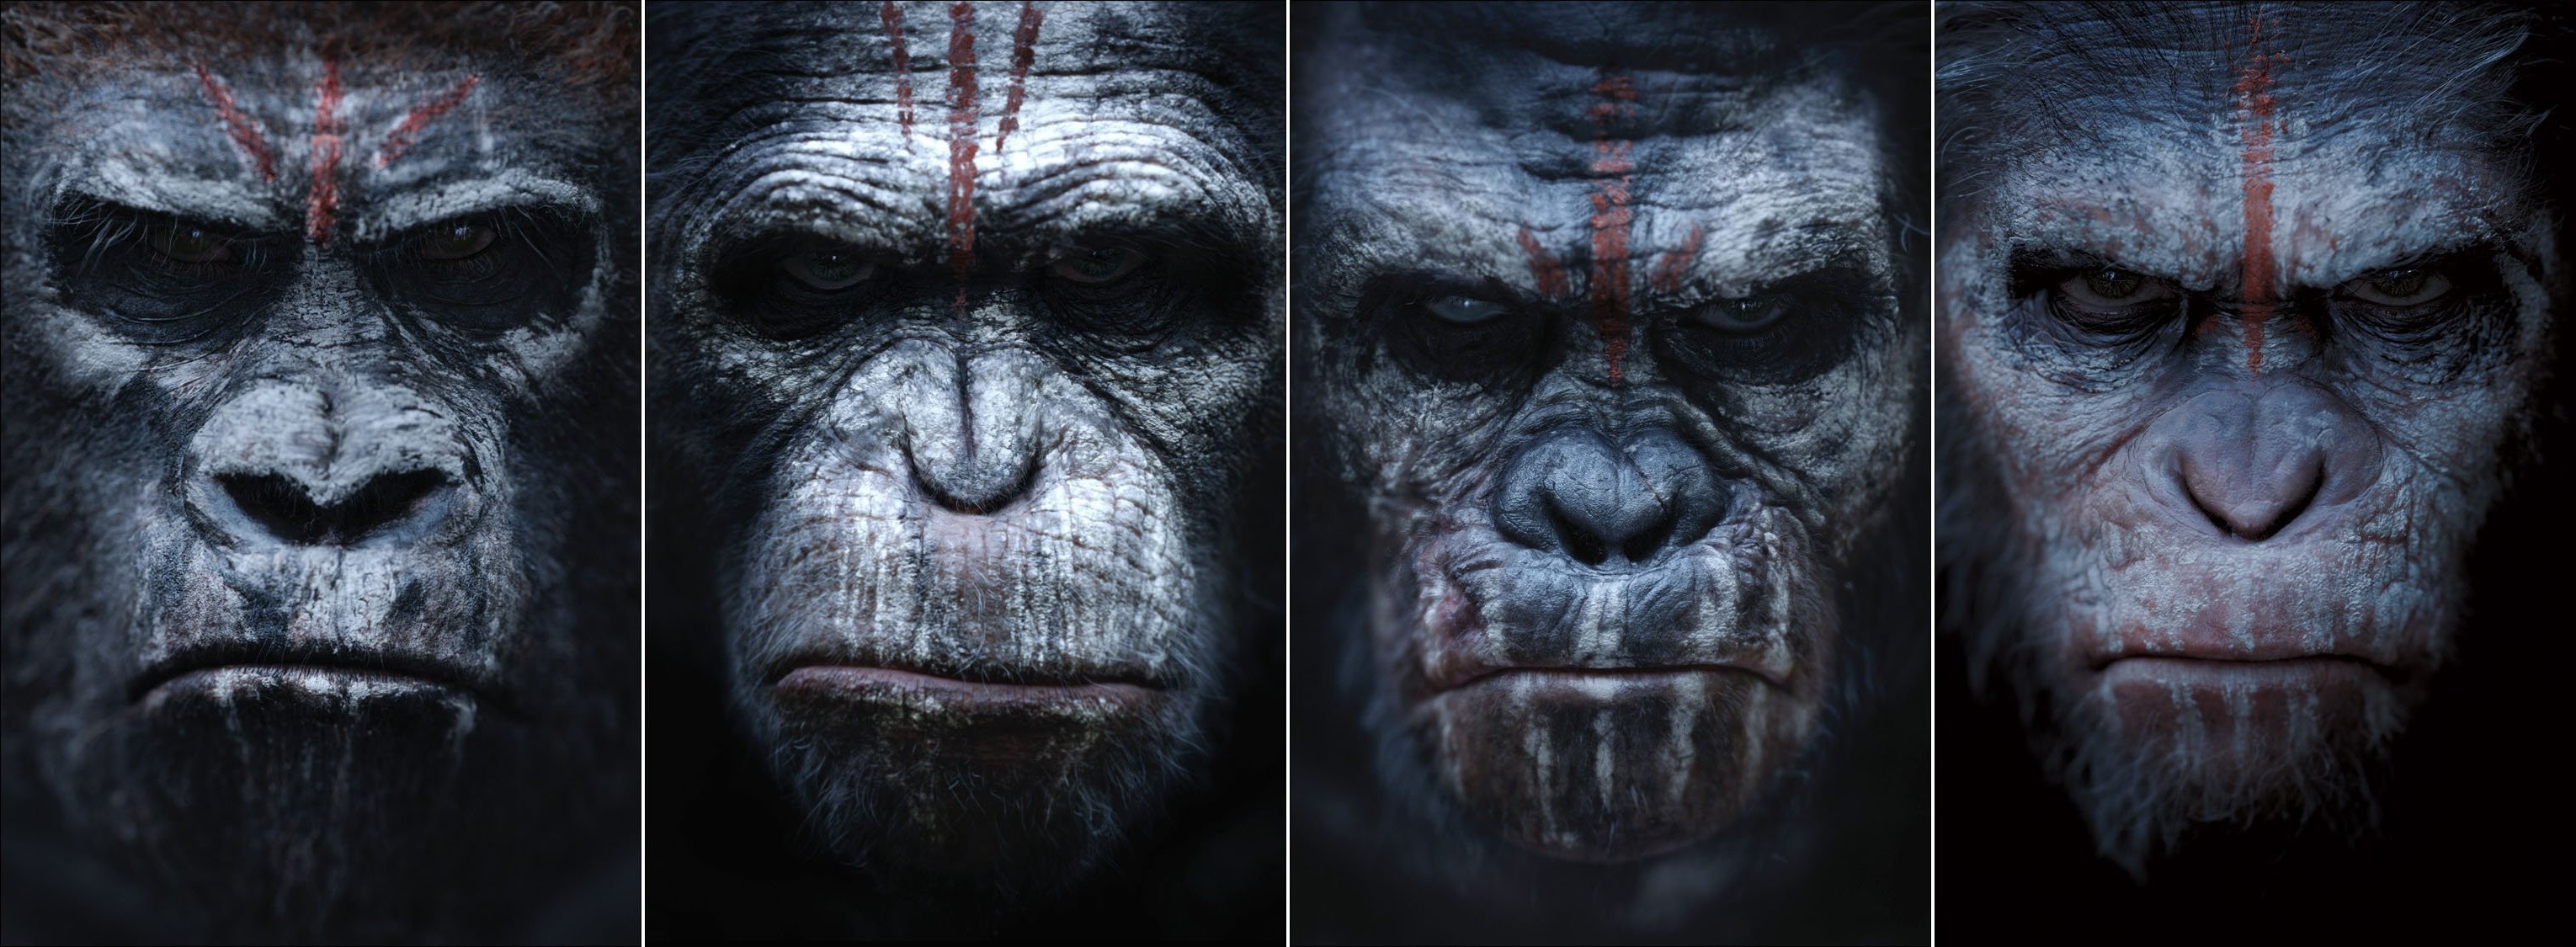 Planet Of The Apes, Dawn Of The Planet Of The Apes, Apes, Movies Wallpaper